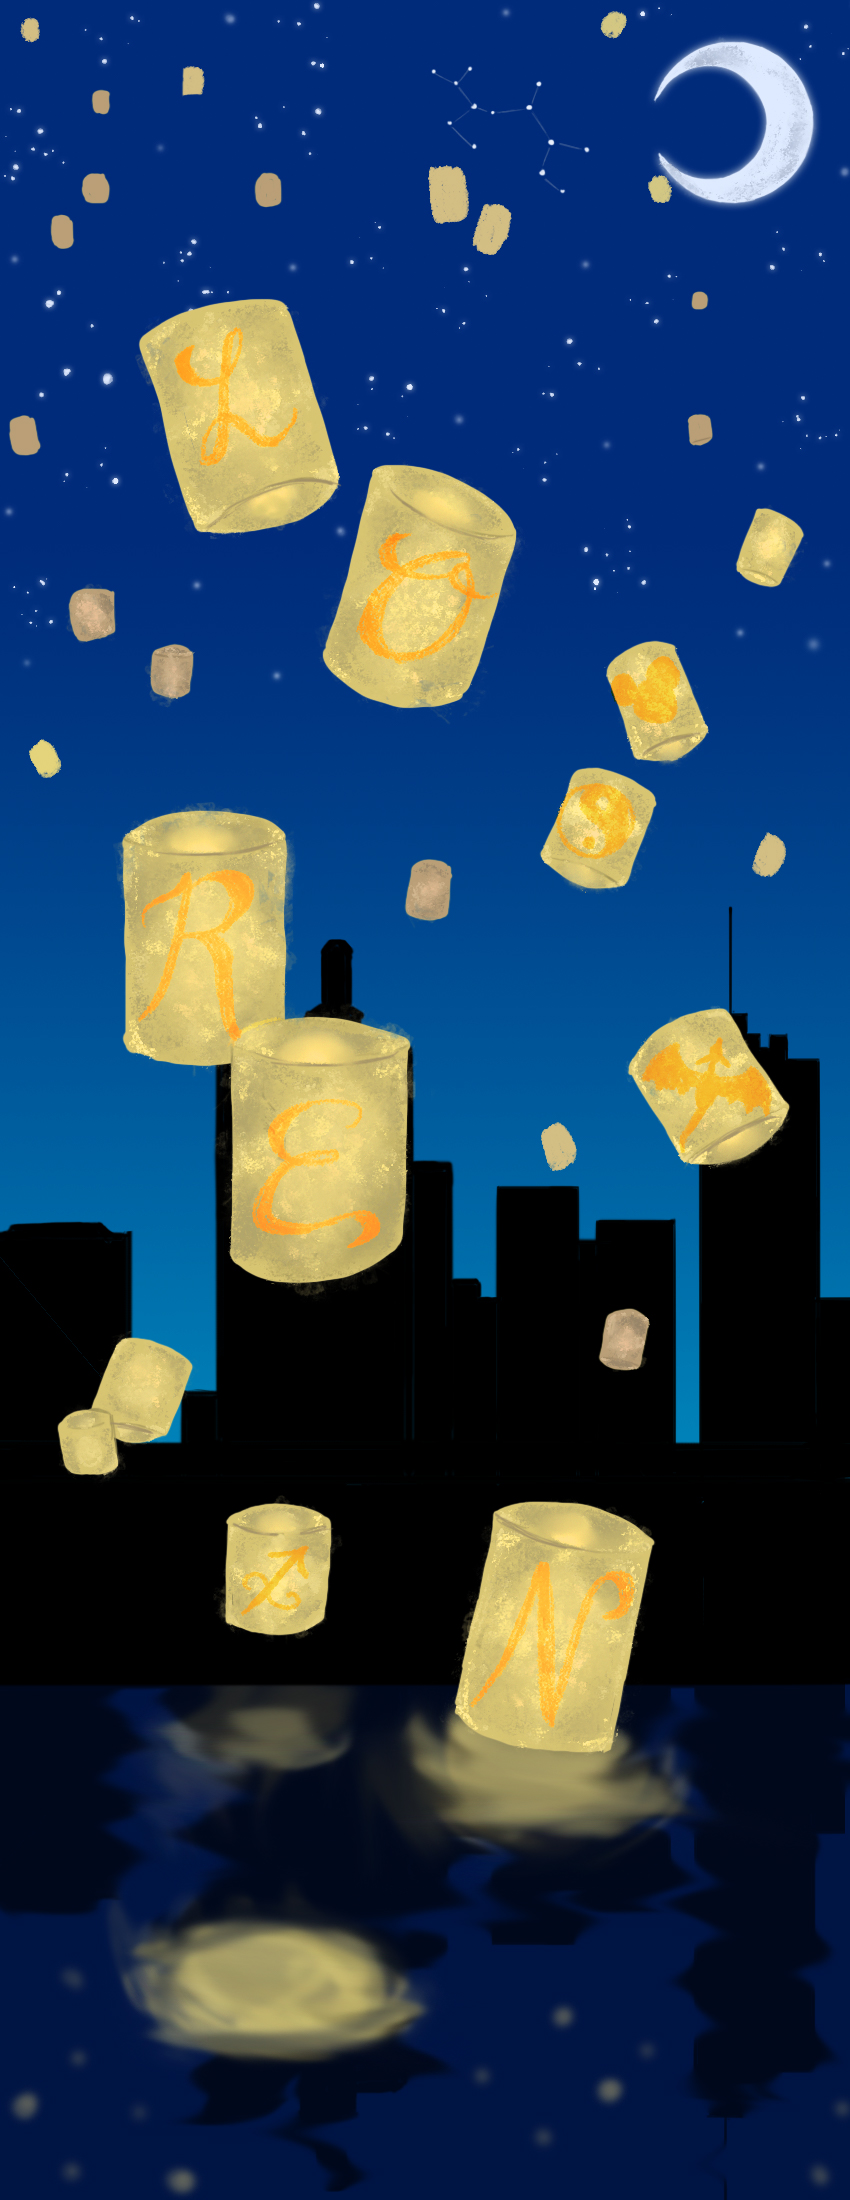 gradient night background with silhouette of city. Glowing lanterns in the sky with my name and symbols on them. 